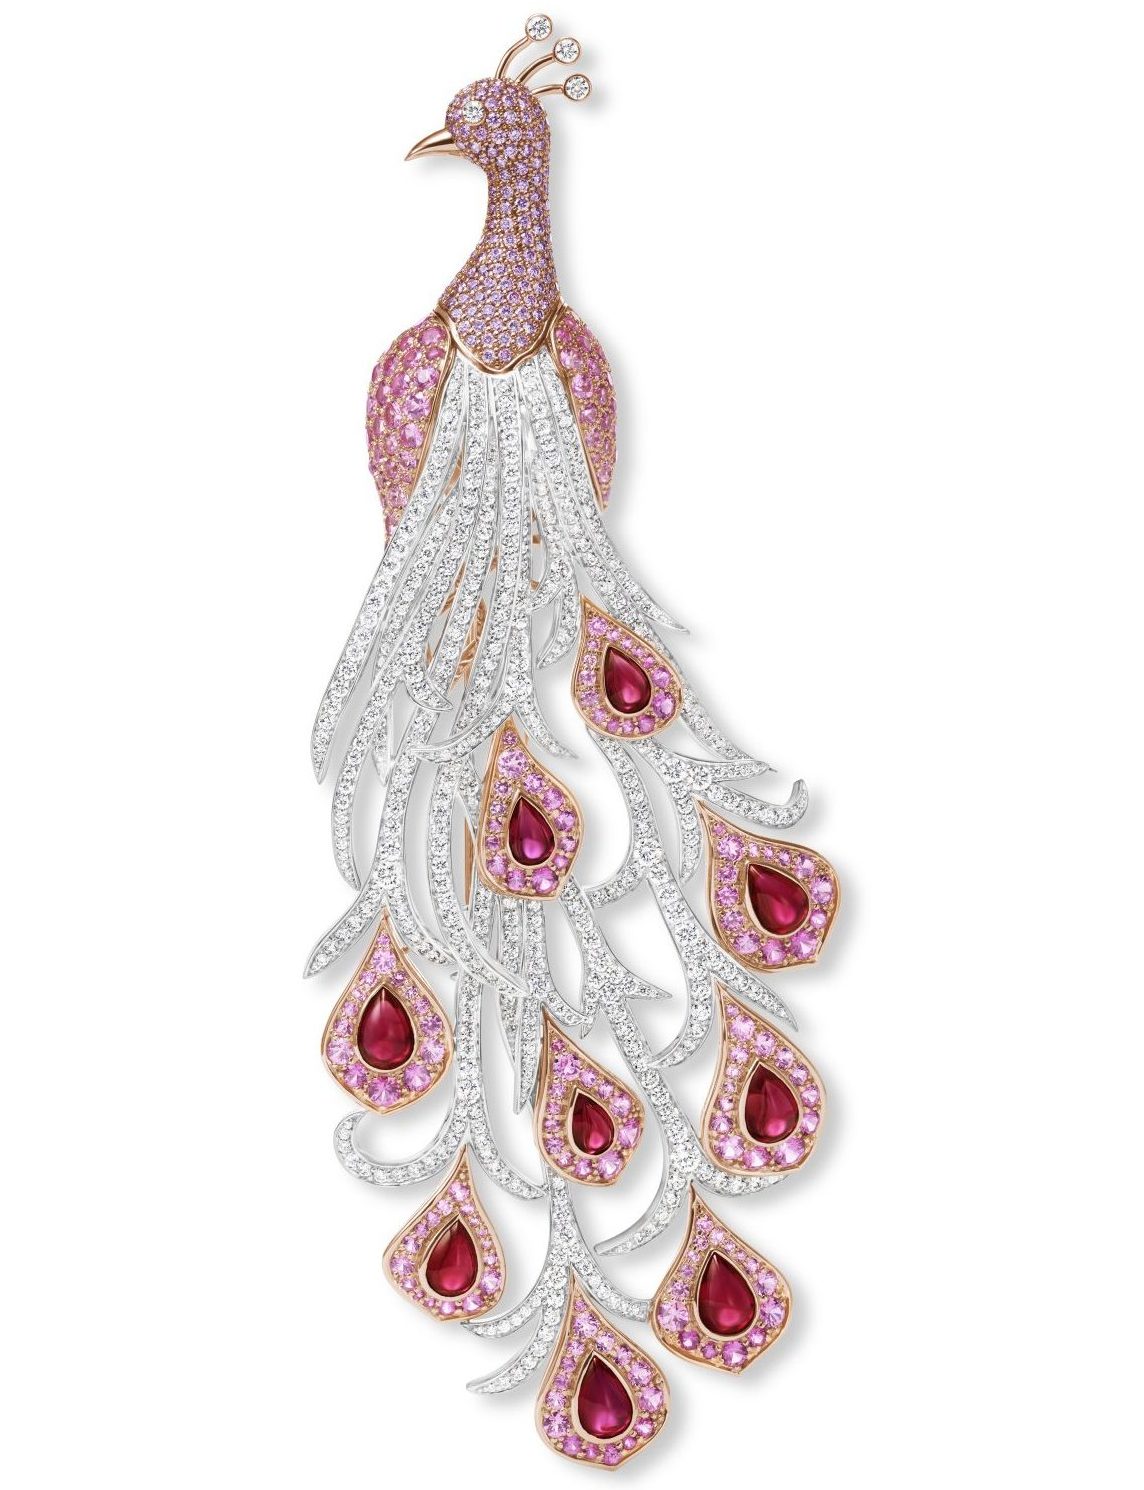 The Art of Craft: Harry Winston’s New ‘Marvelous Creations’ Collection ...